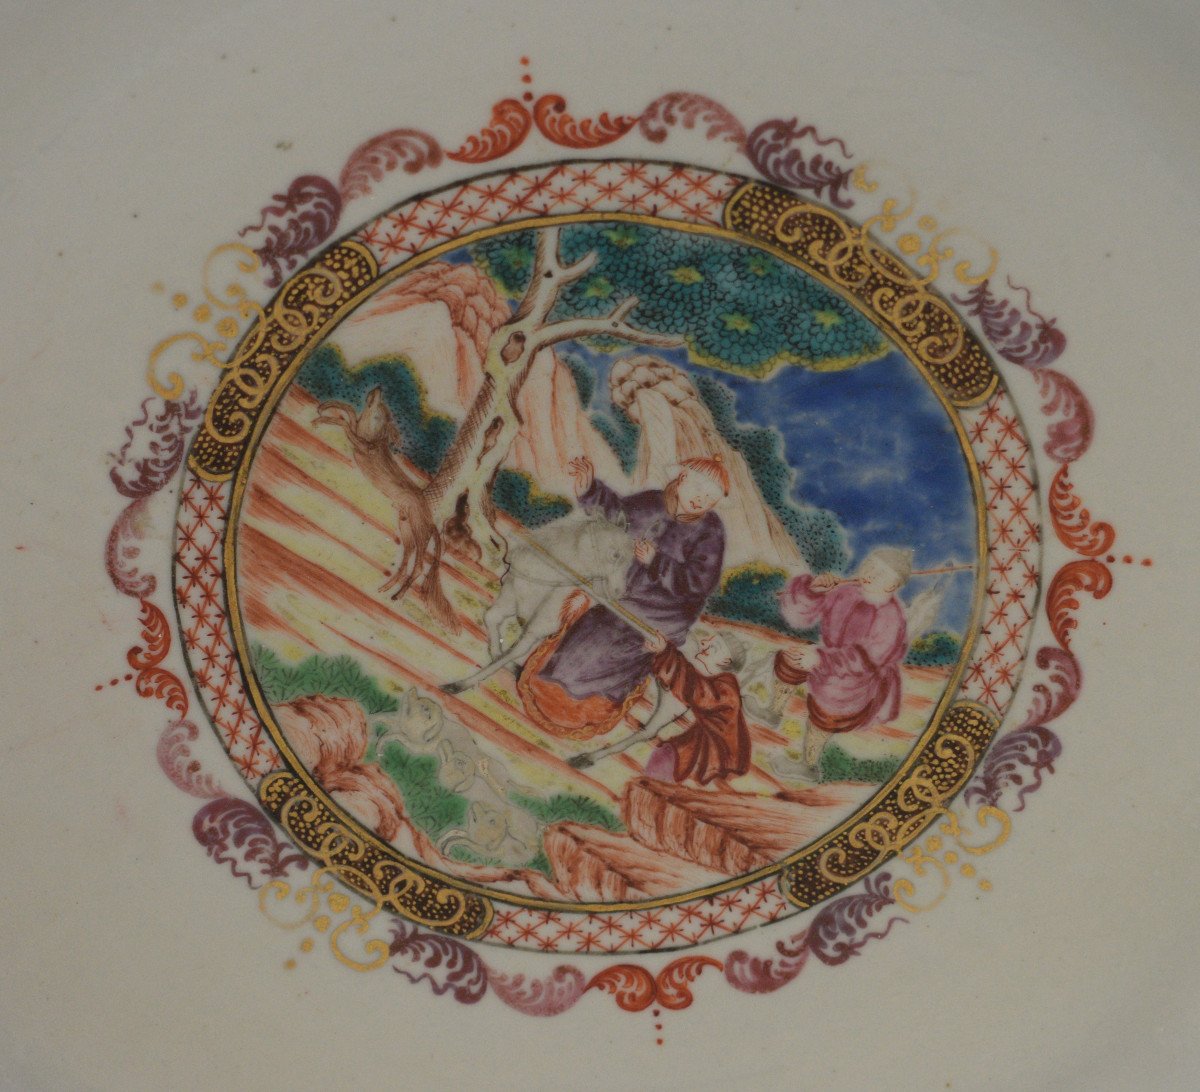 Large Porcelain Bowl From The Compagnie Des Indes Decor With Mandarins China XVIII Eme Century-photo-1